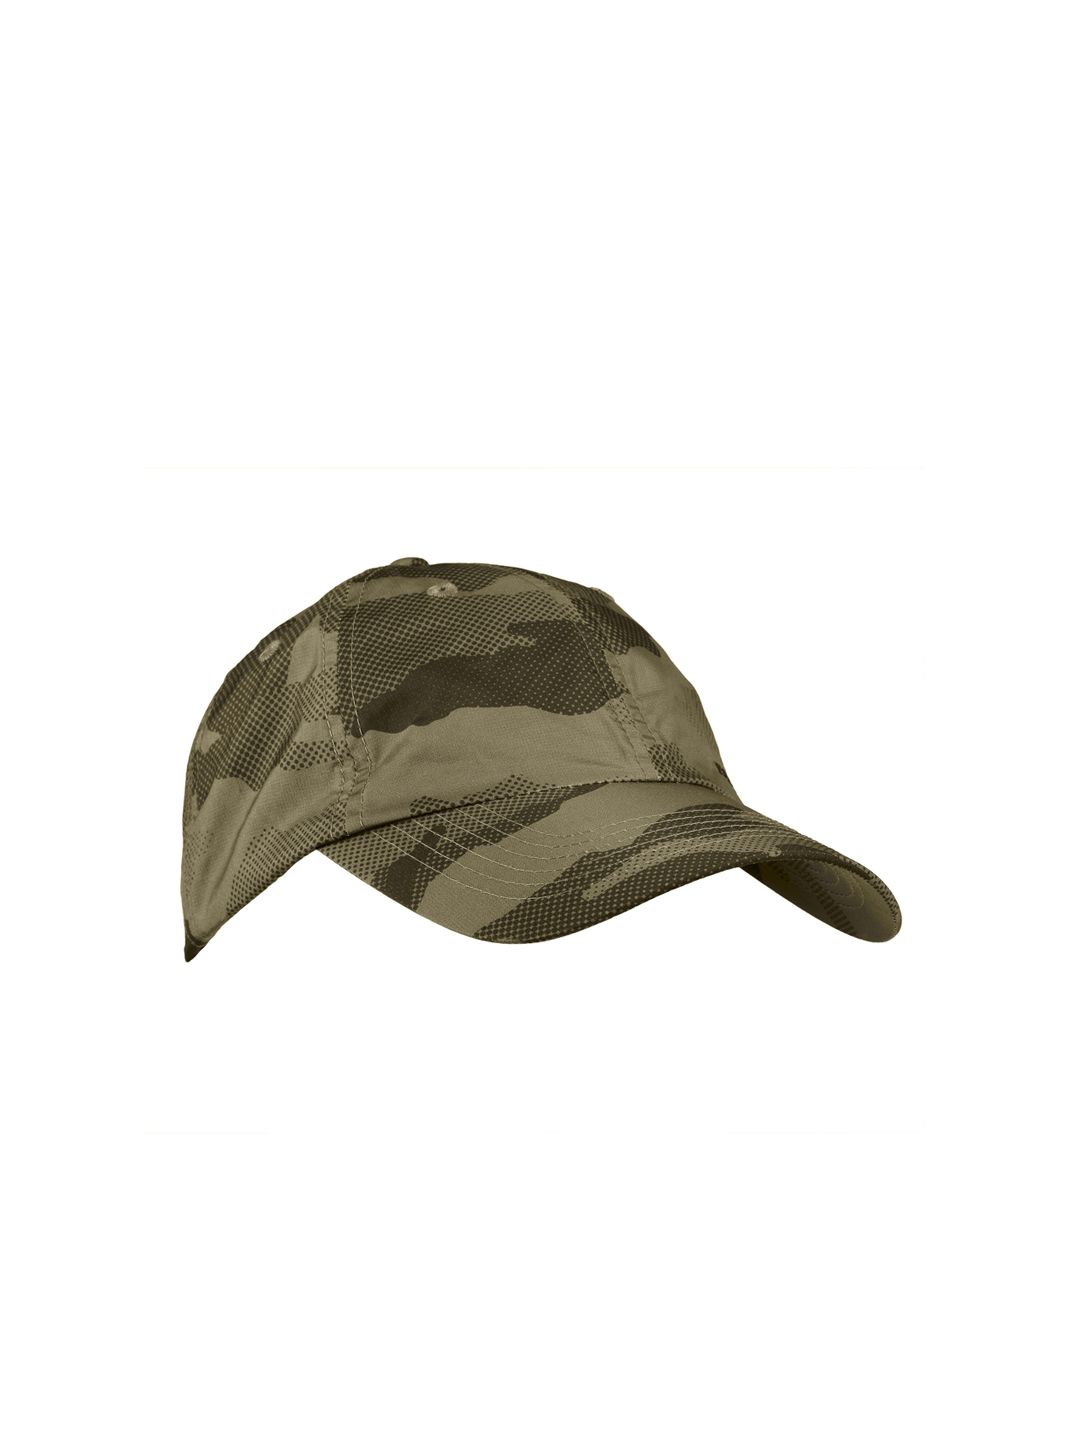 SOLOGNAC By Decathlon Unisex Green & Brown Printed Baseball Cap Price in India